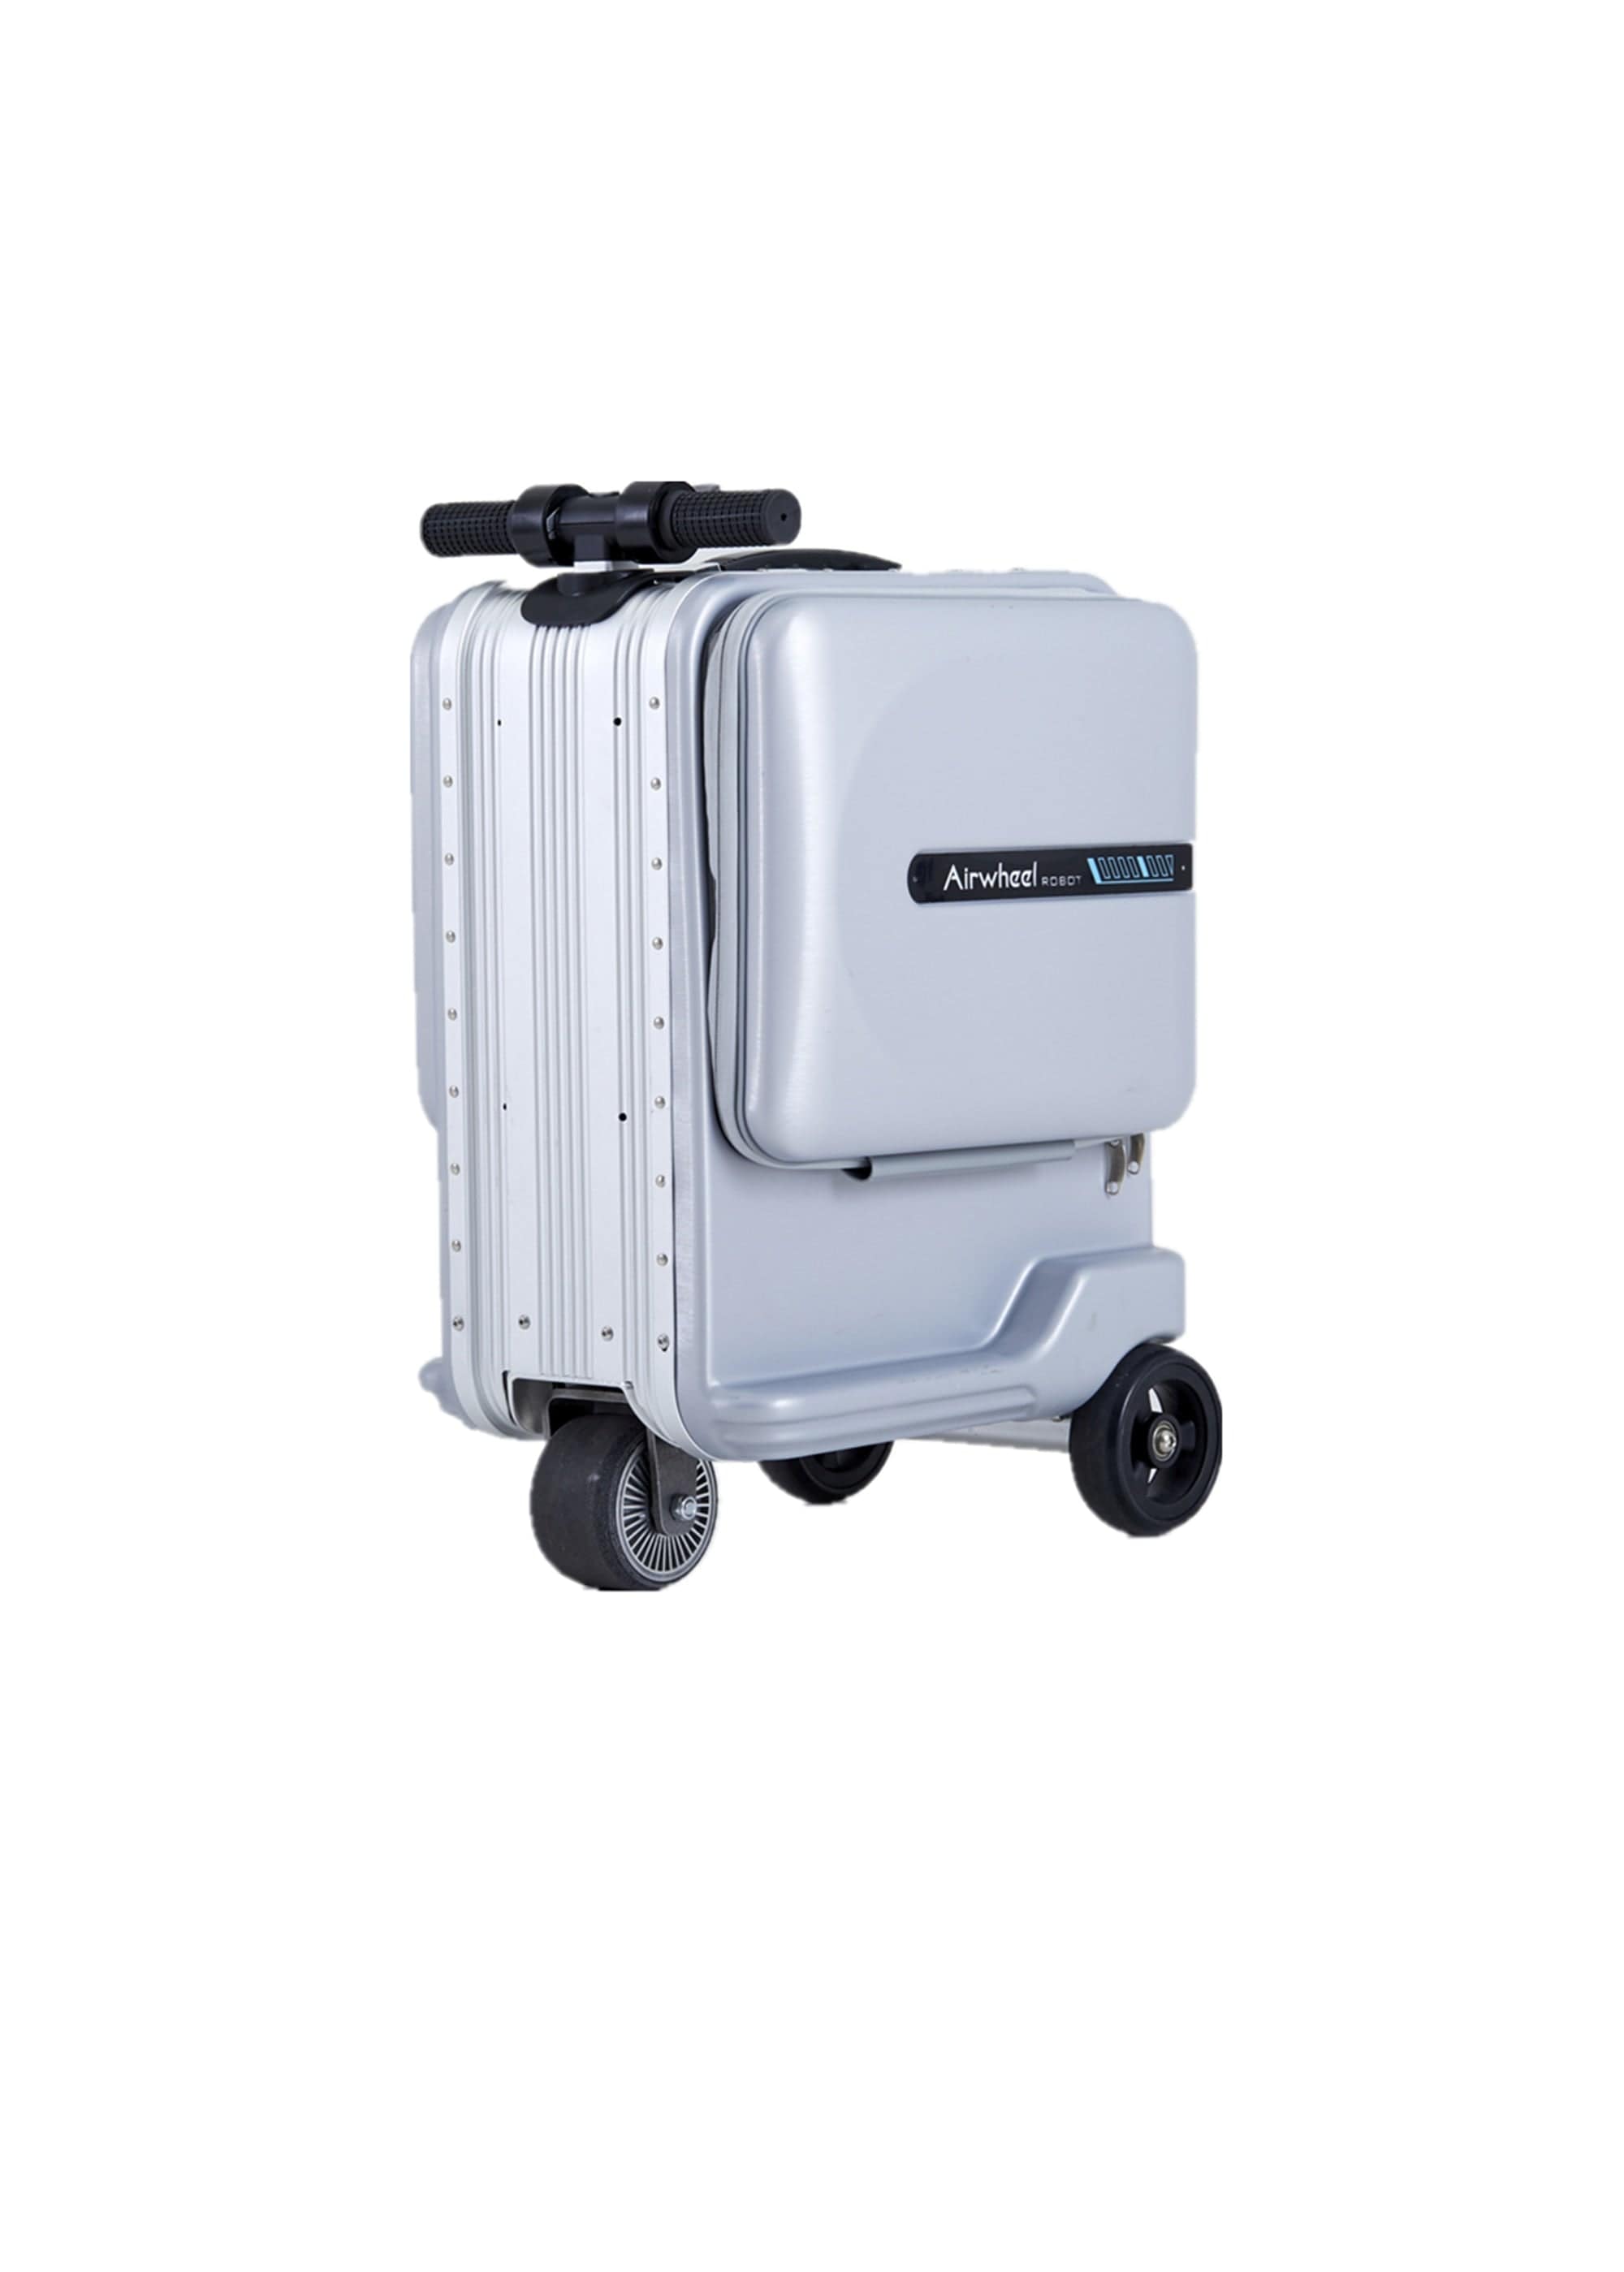 HomeBound Essentials Silver AirWheel - Smart Riding Scooter Traveling Suitcase